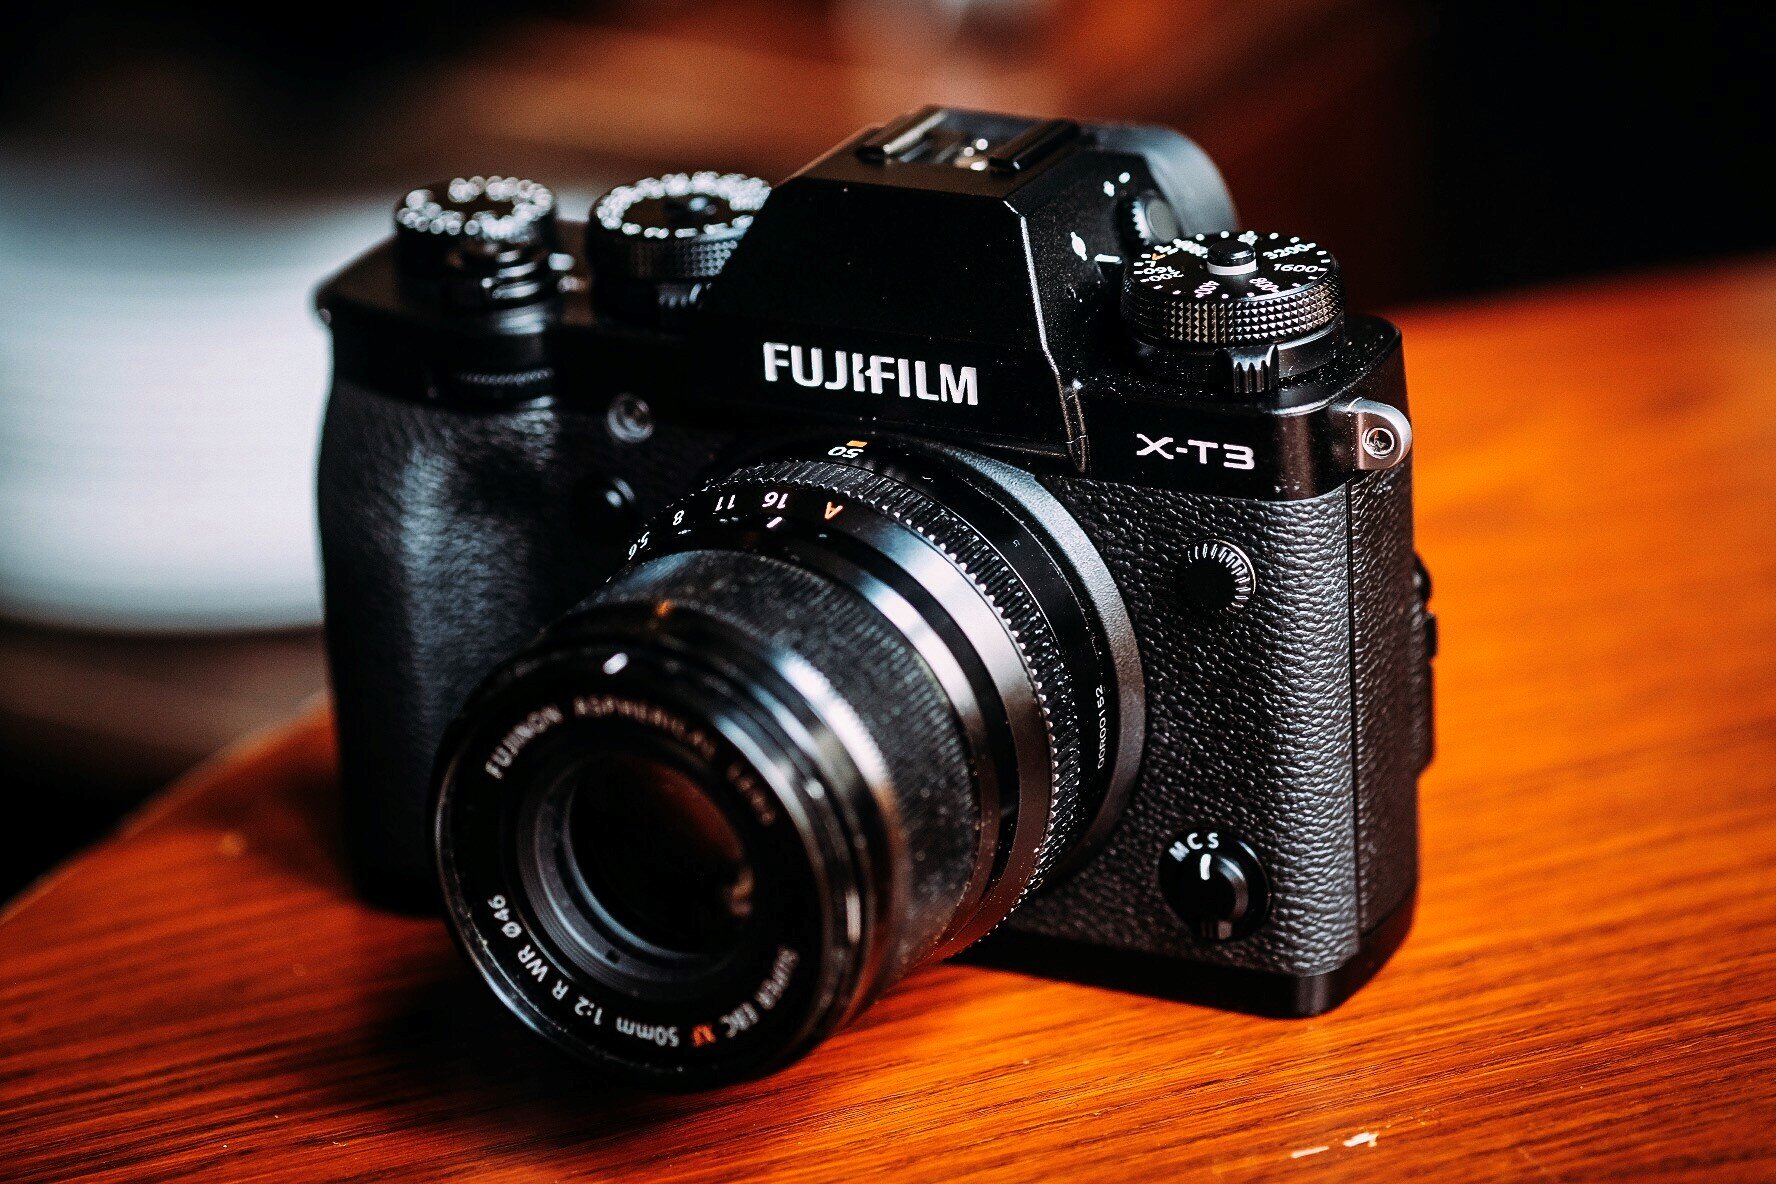 Fujifilm X-T3 Review / Overview